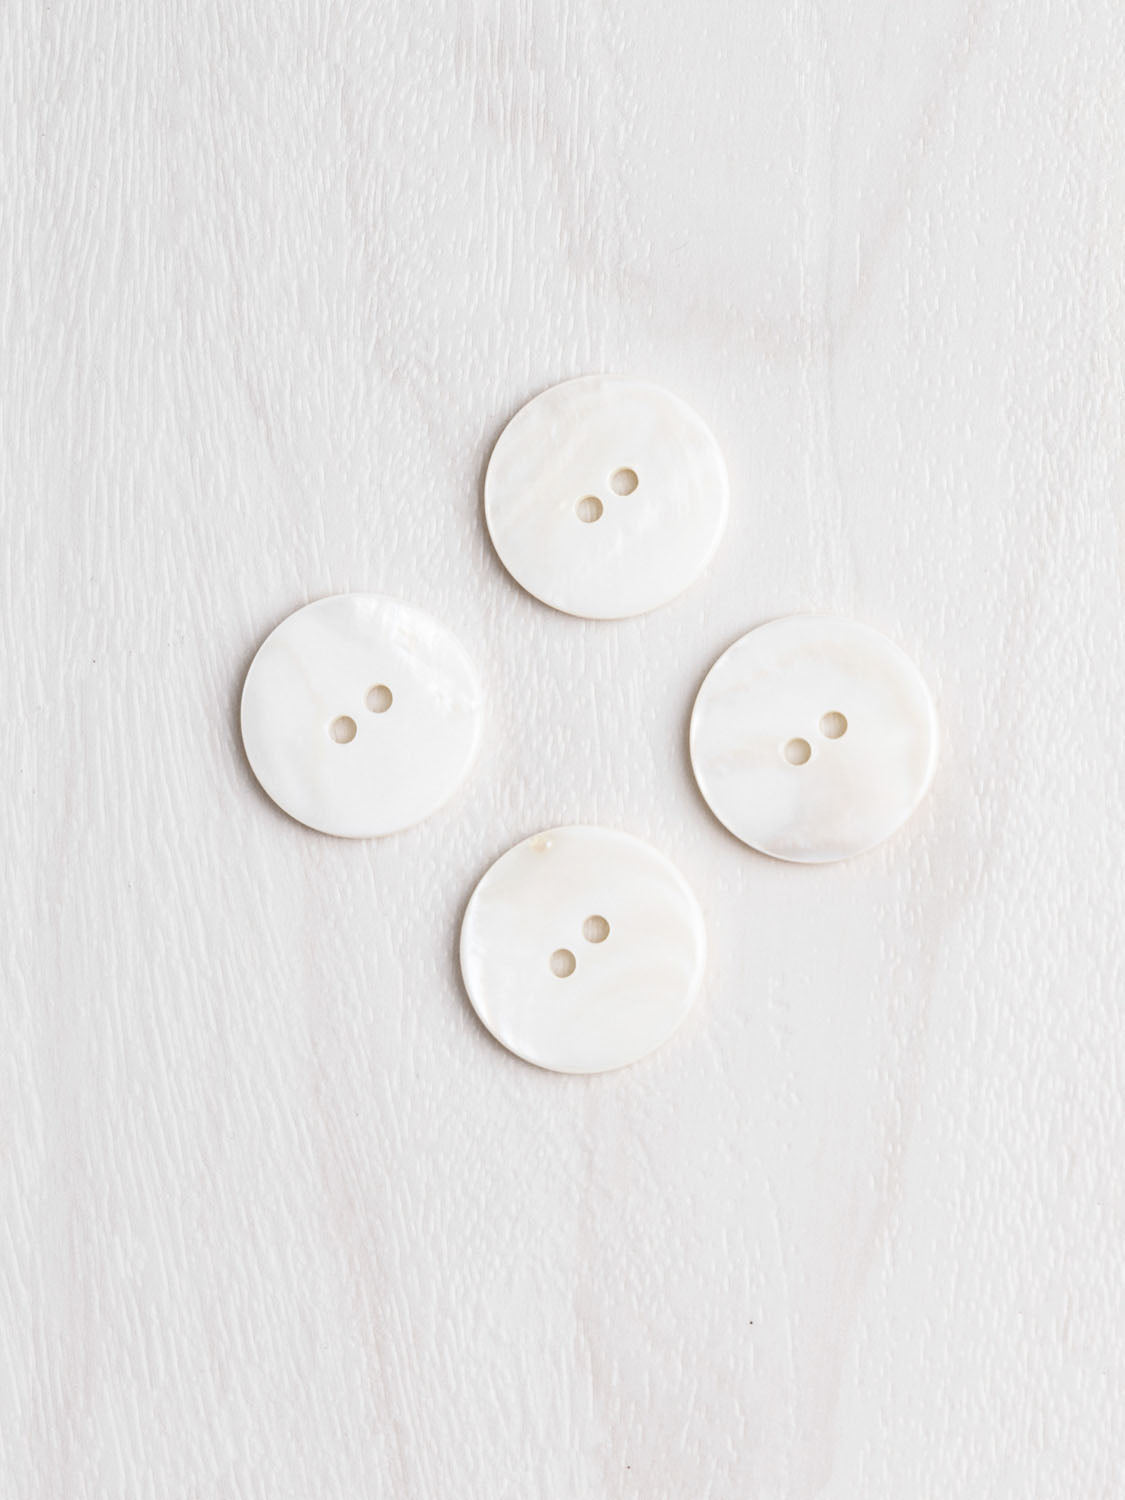 KJHBV 100pcs Tree of Life Button Sweater Buttons Garment Buttons Round  Button Round Bulk Buttons DIY Buttons Resin Crafts Delicate Clothes Buttons